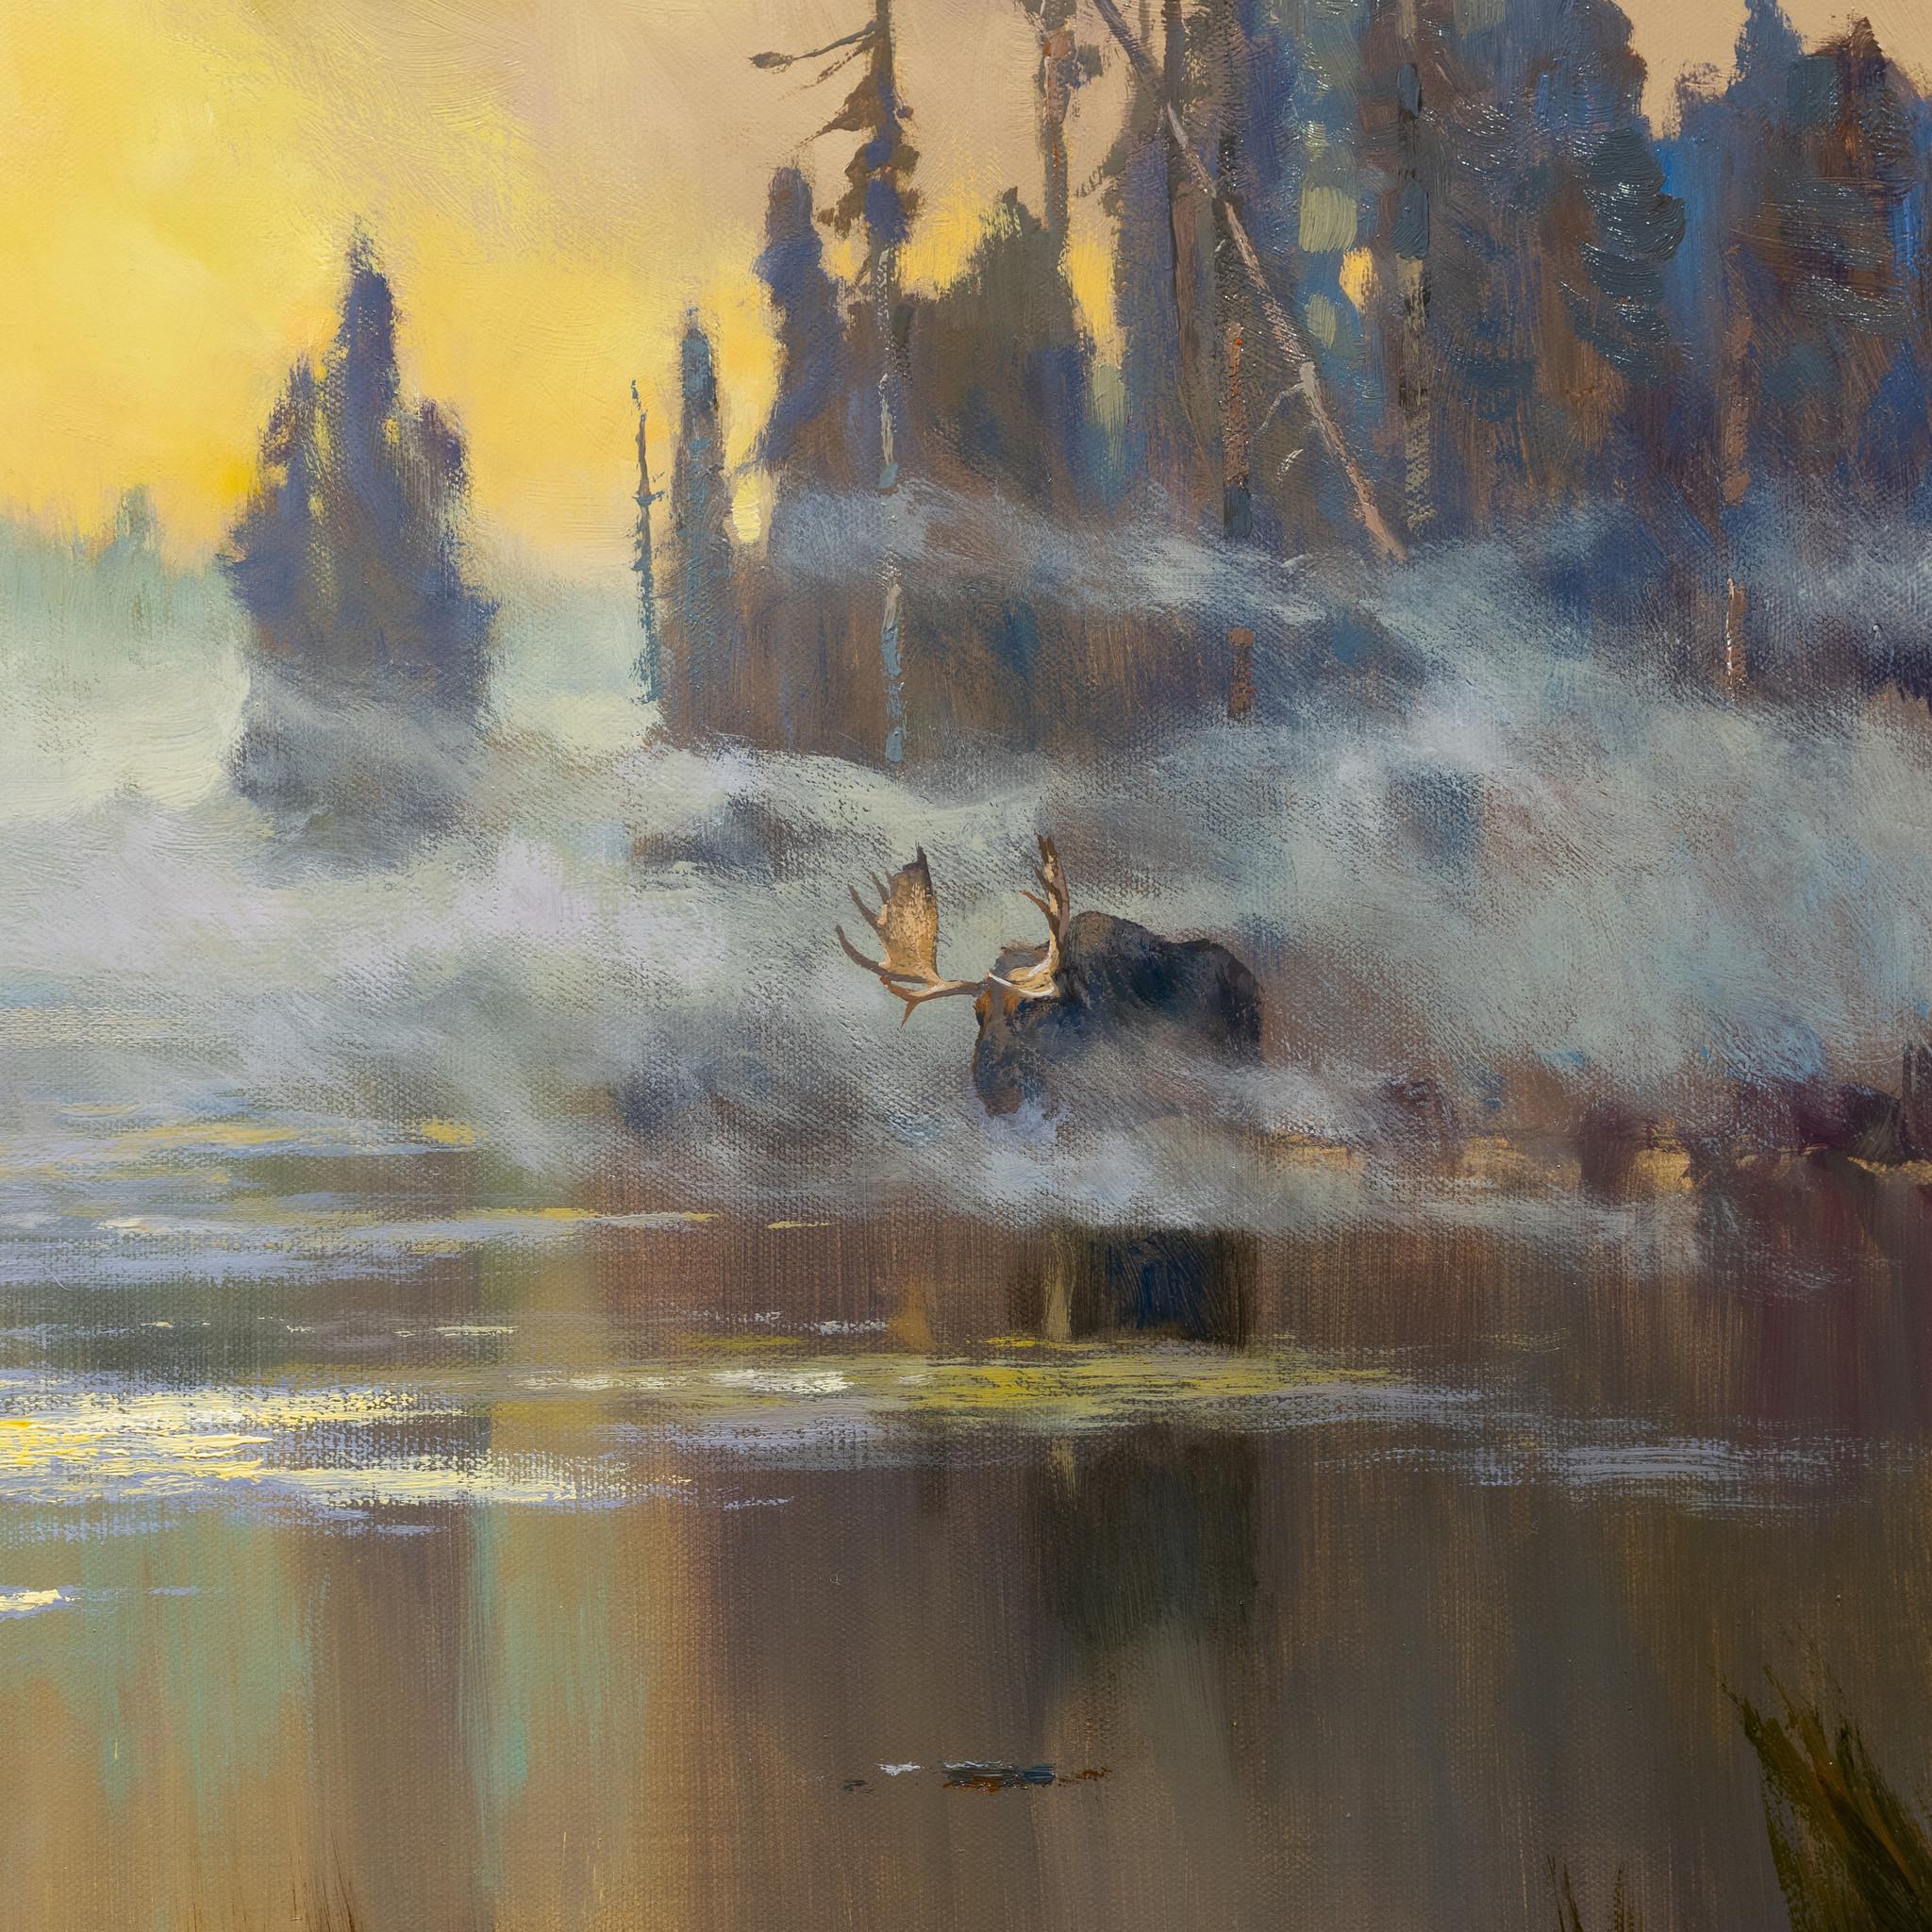 Early Morning Rival Original Oil Painting By Greg Parker At 1stdibs